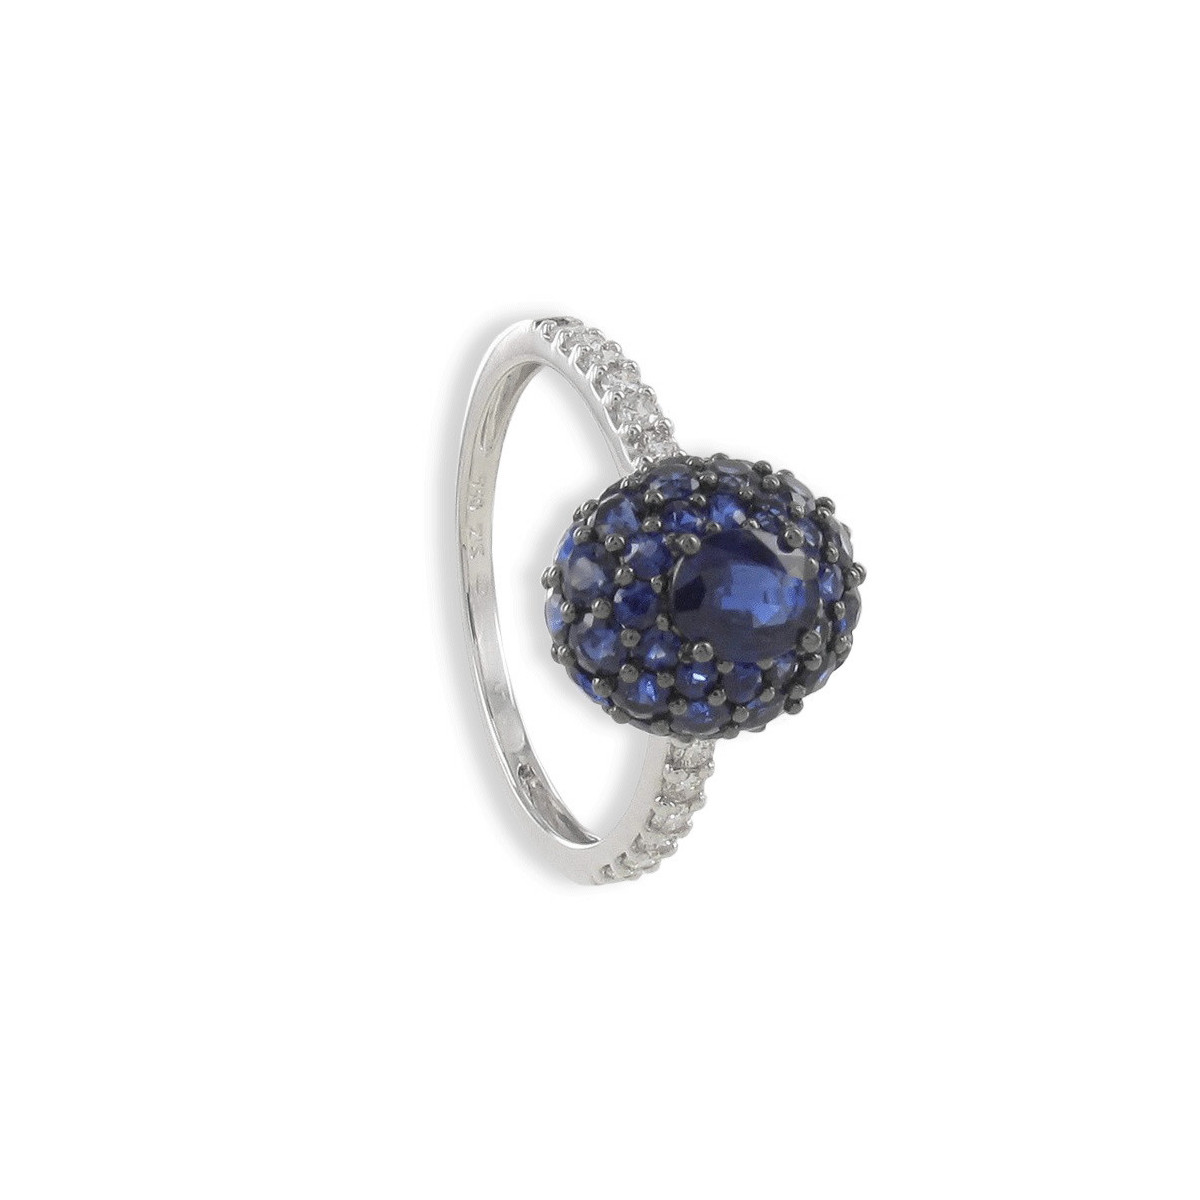 RING WITH SAPPHIRES 1.81 CARATS